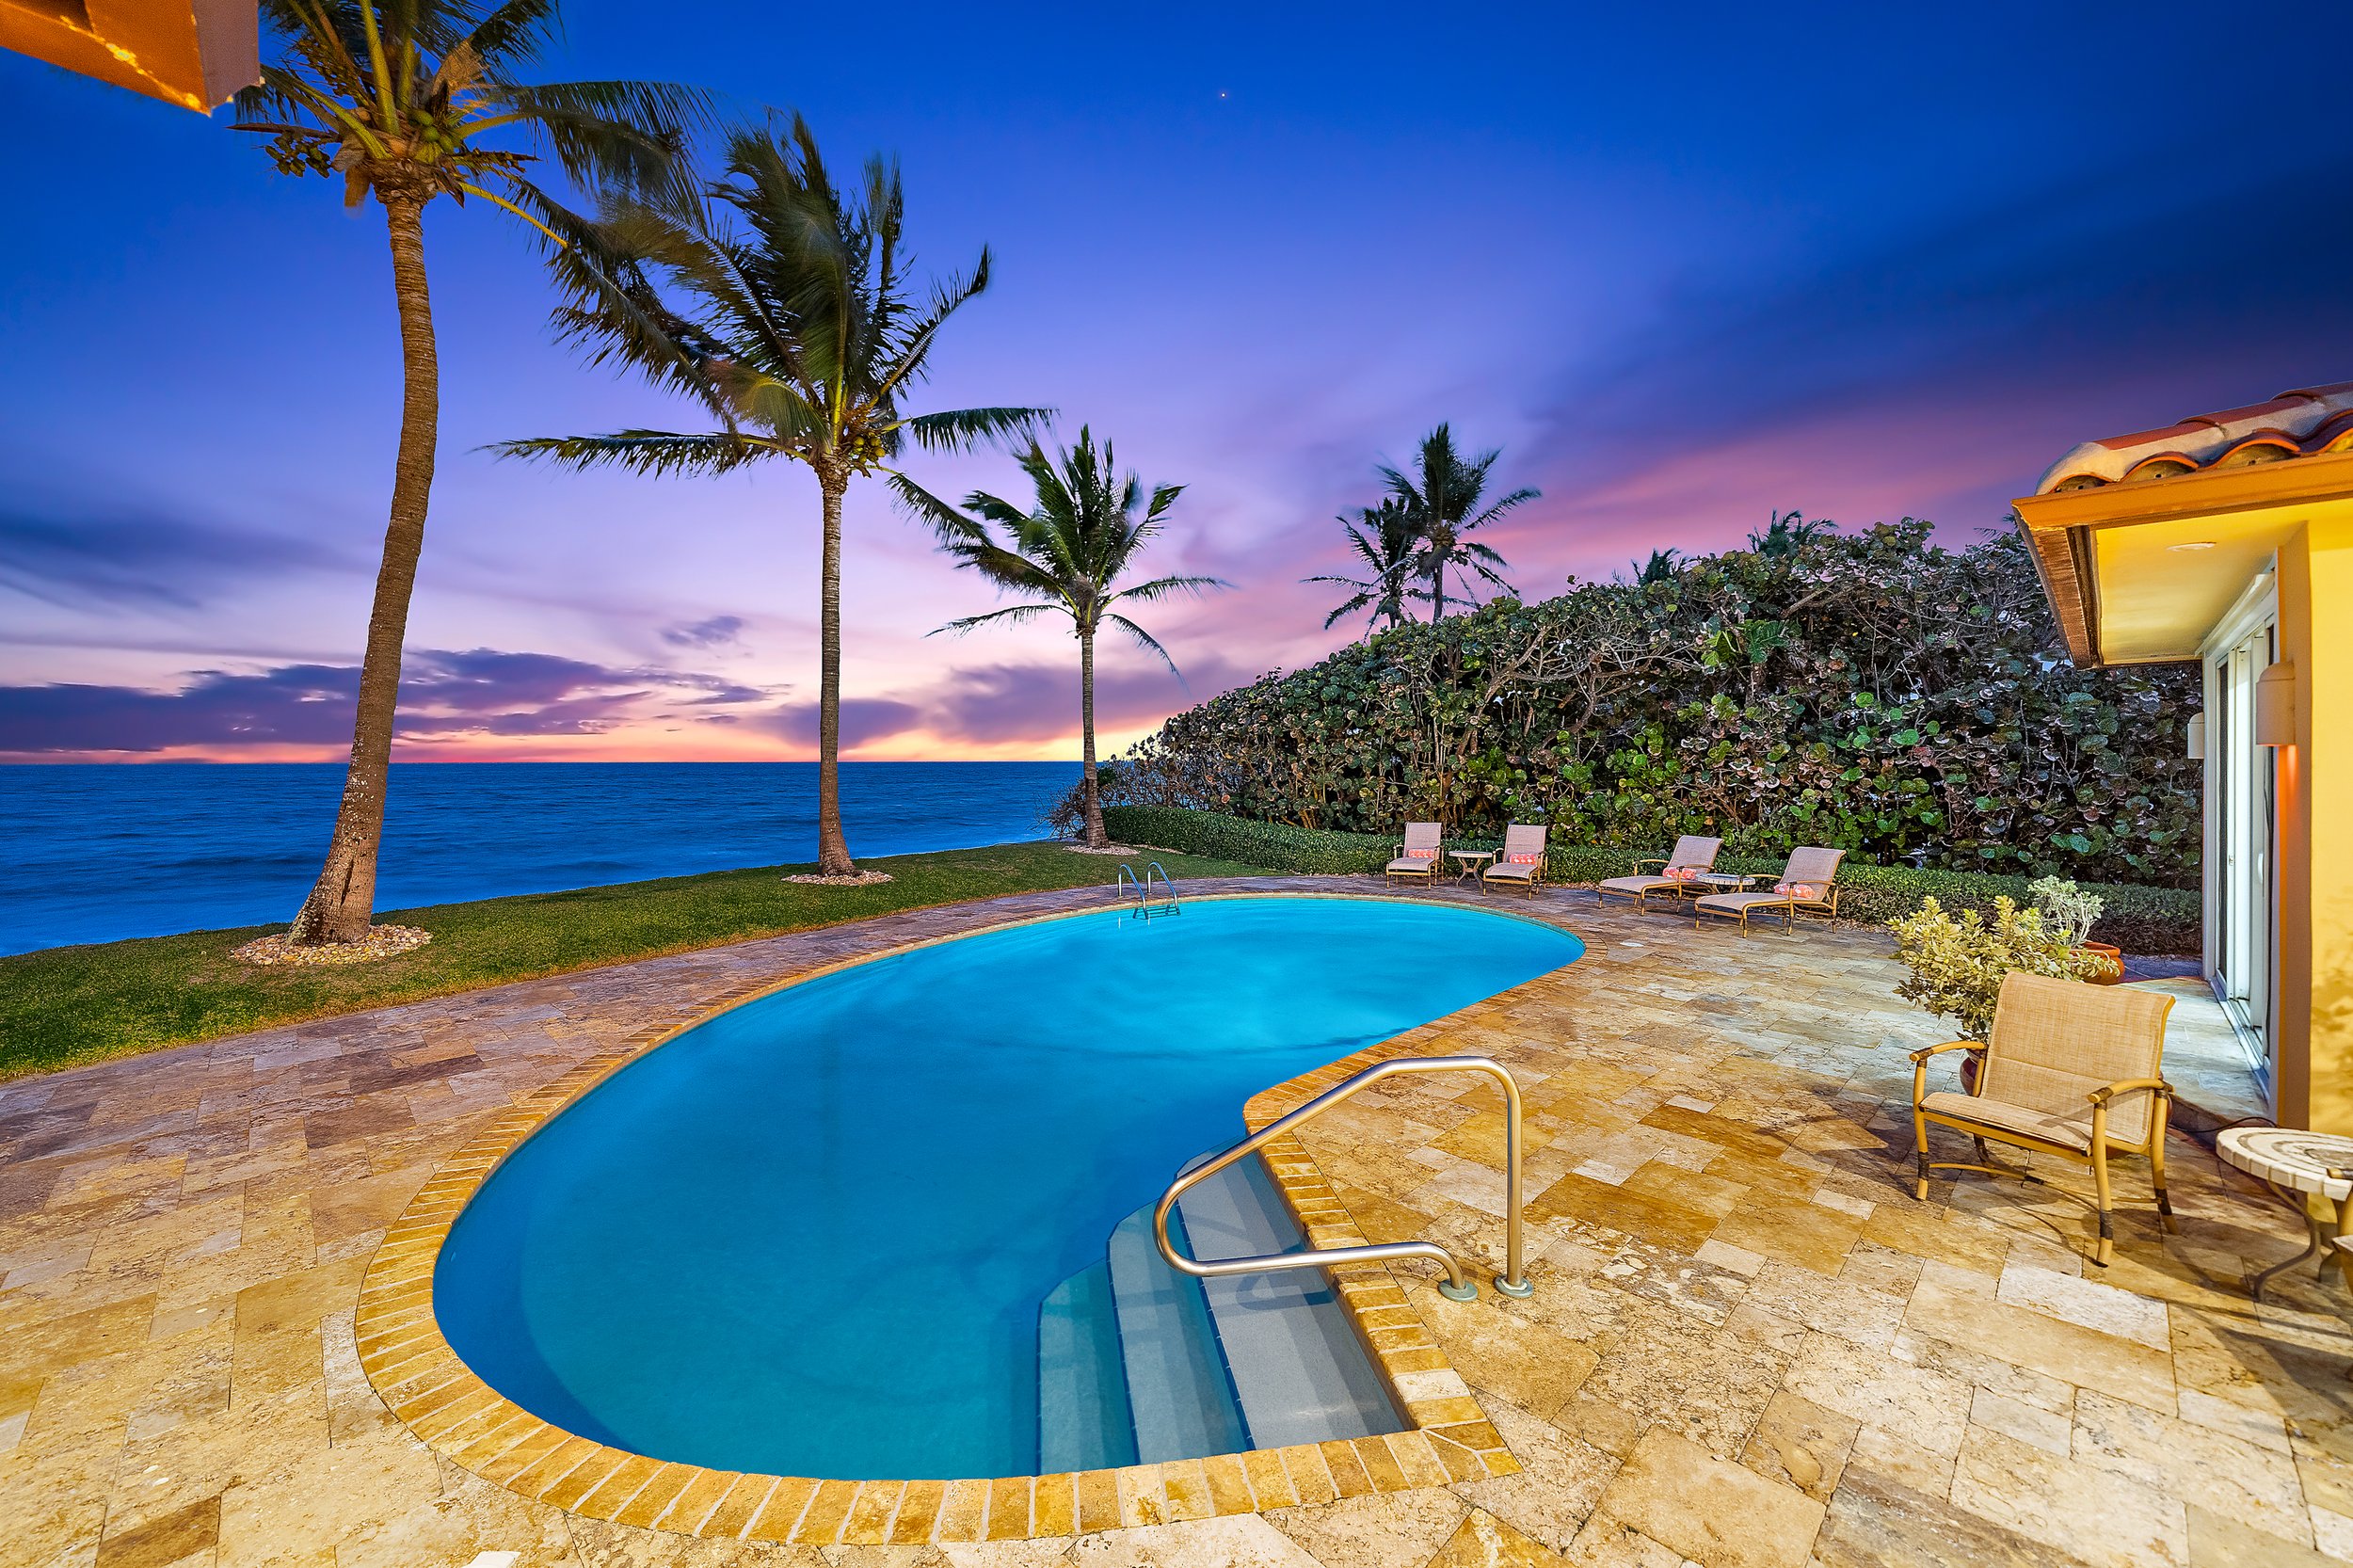 Tour A Jupiter Beachfront Mansion Owned By Clyde R. %22Buzz%22 Gibb Which Is Asking $24.9 Million 113.jpg